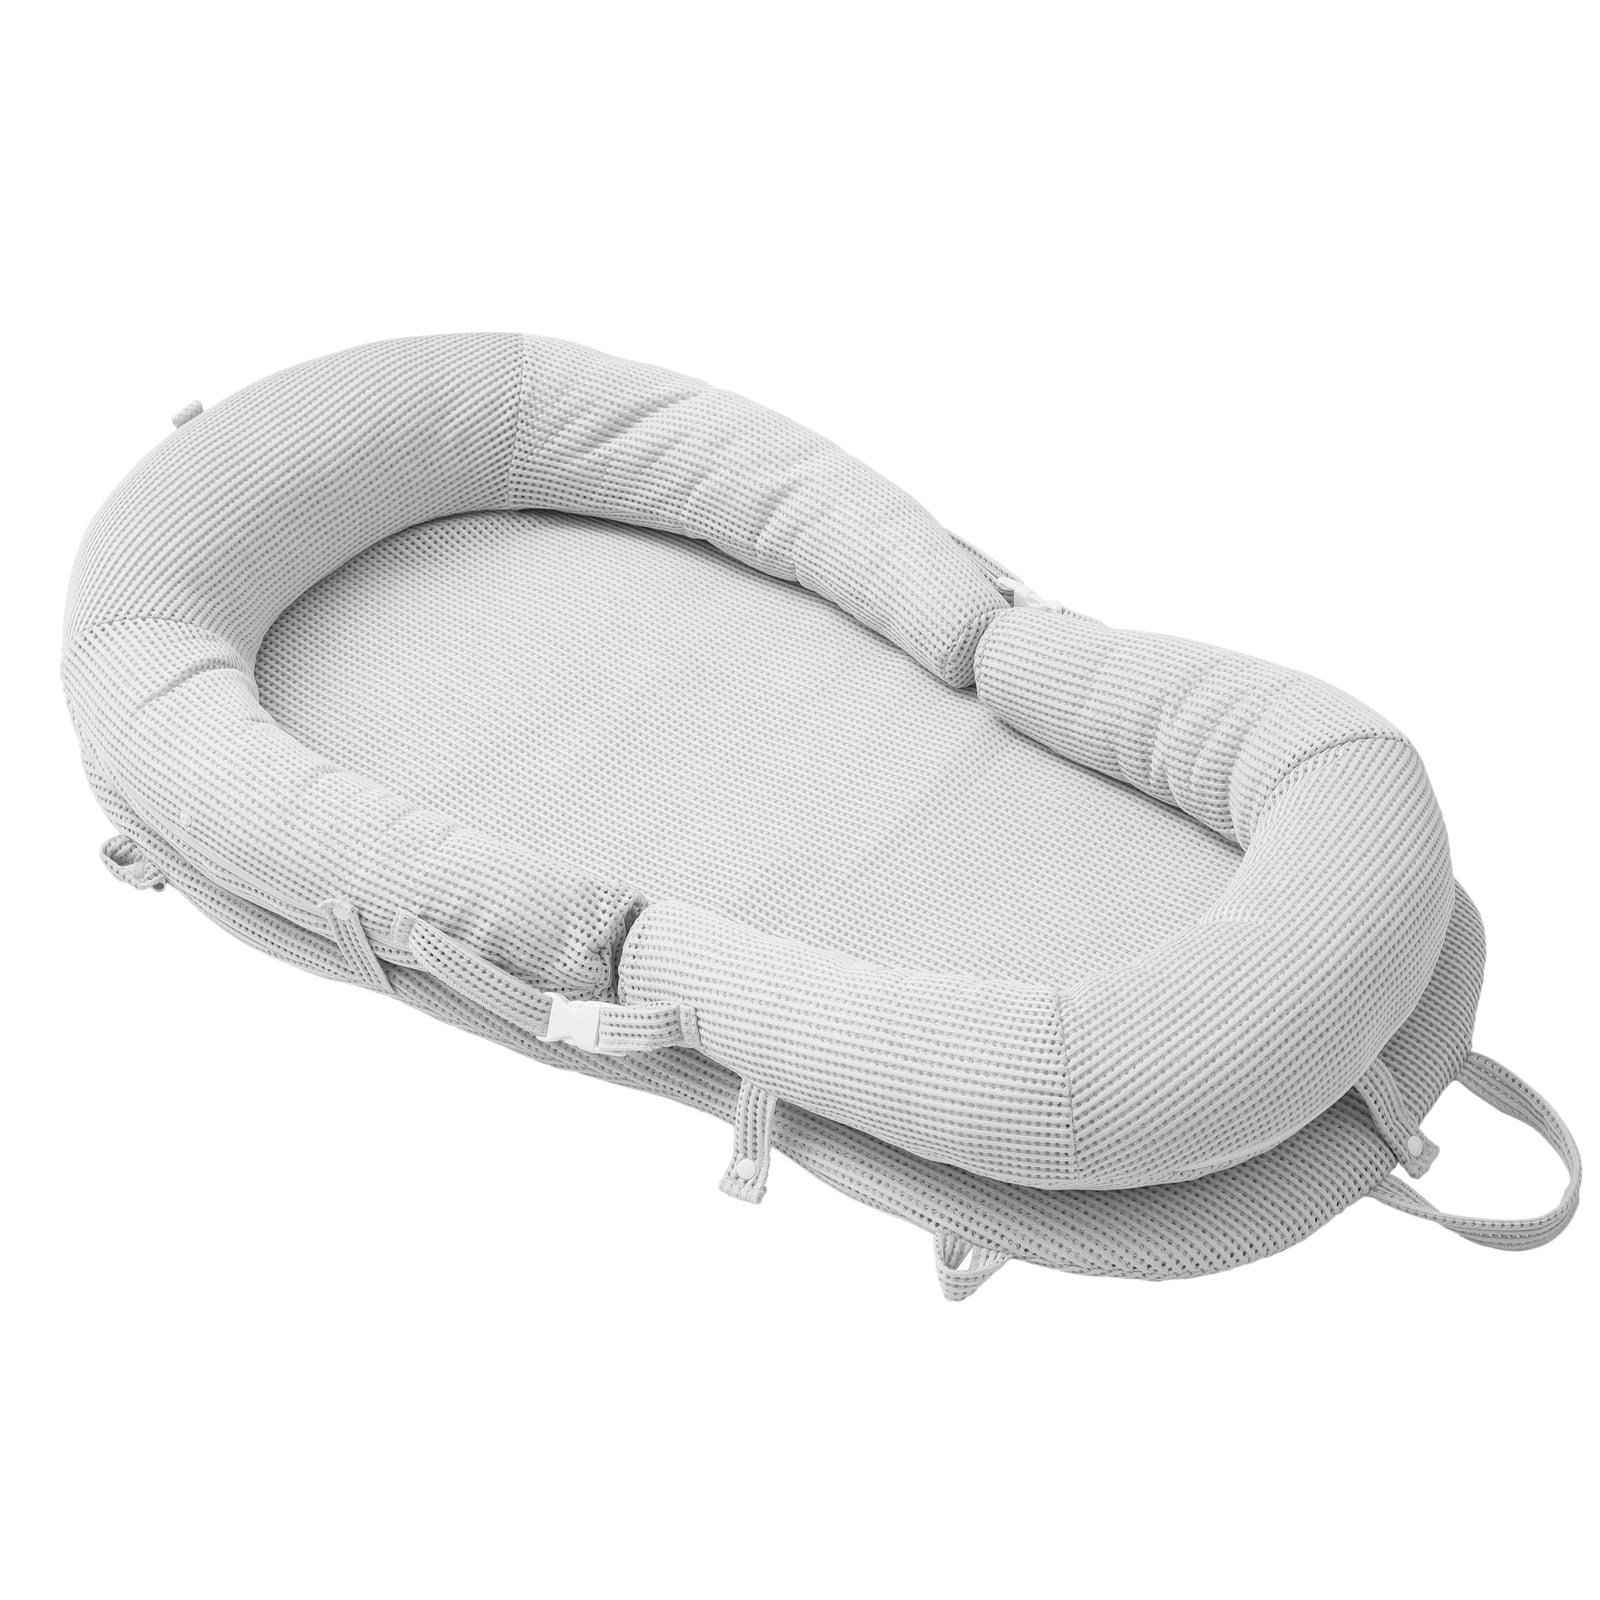 Portable Baby Lounger，Travel-Friendly Infant Sleeper，Cozy and Comfortable Nest Bed，Multi-Function Baby Resting Pod，Foldable Baby Sleep Solution